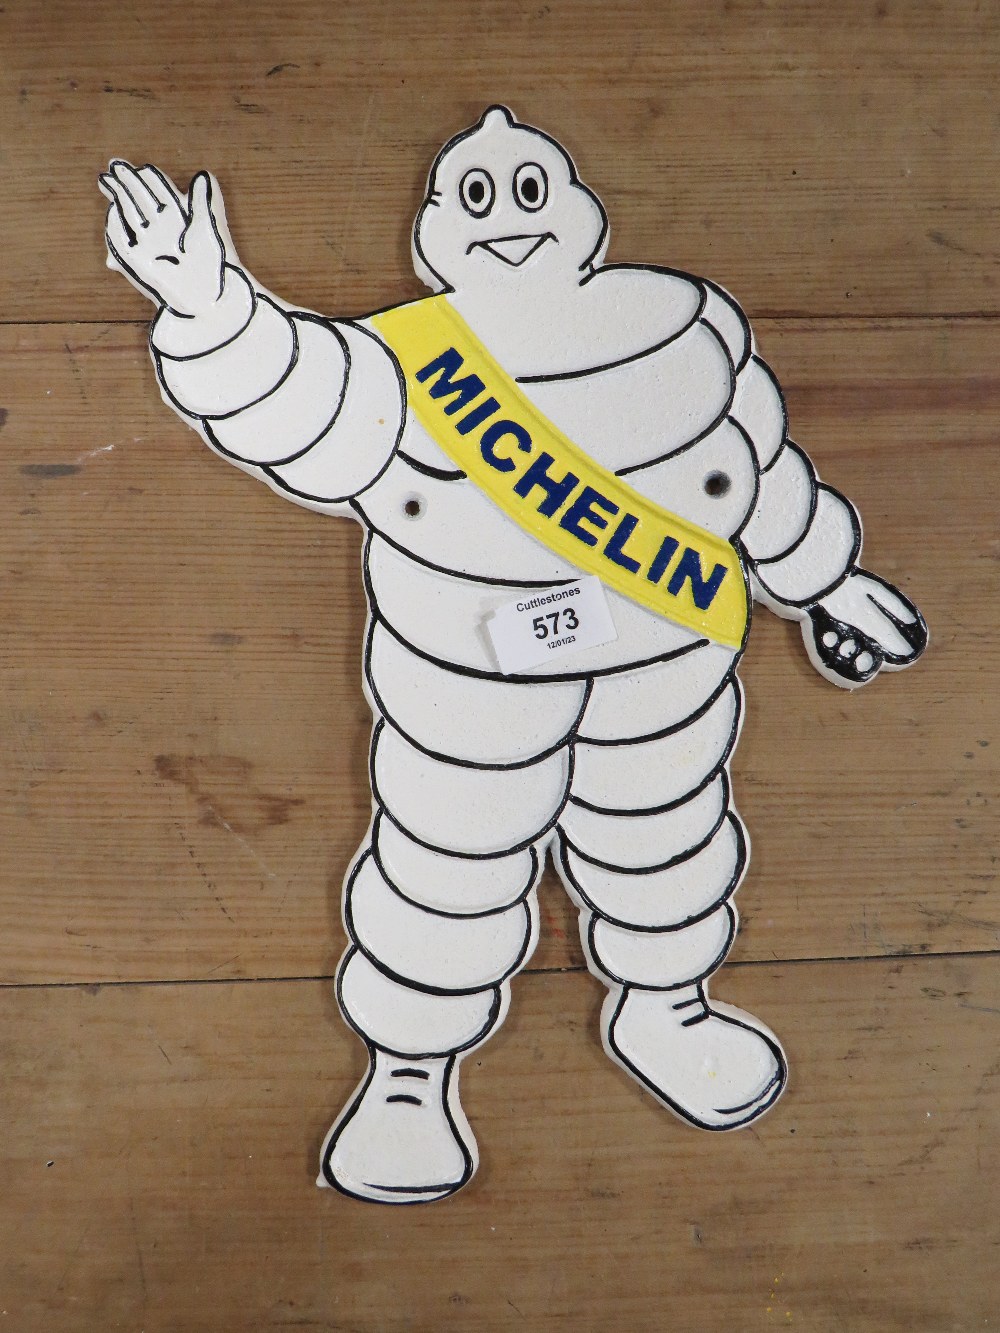 ***A MICHELIN SHAPED PLAQUE**